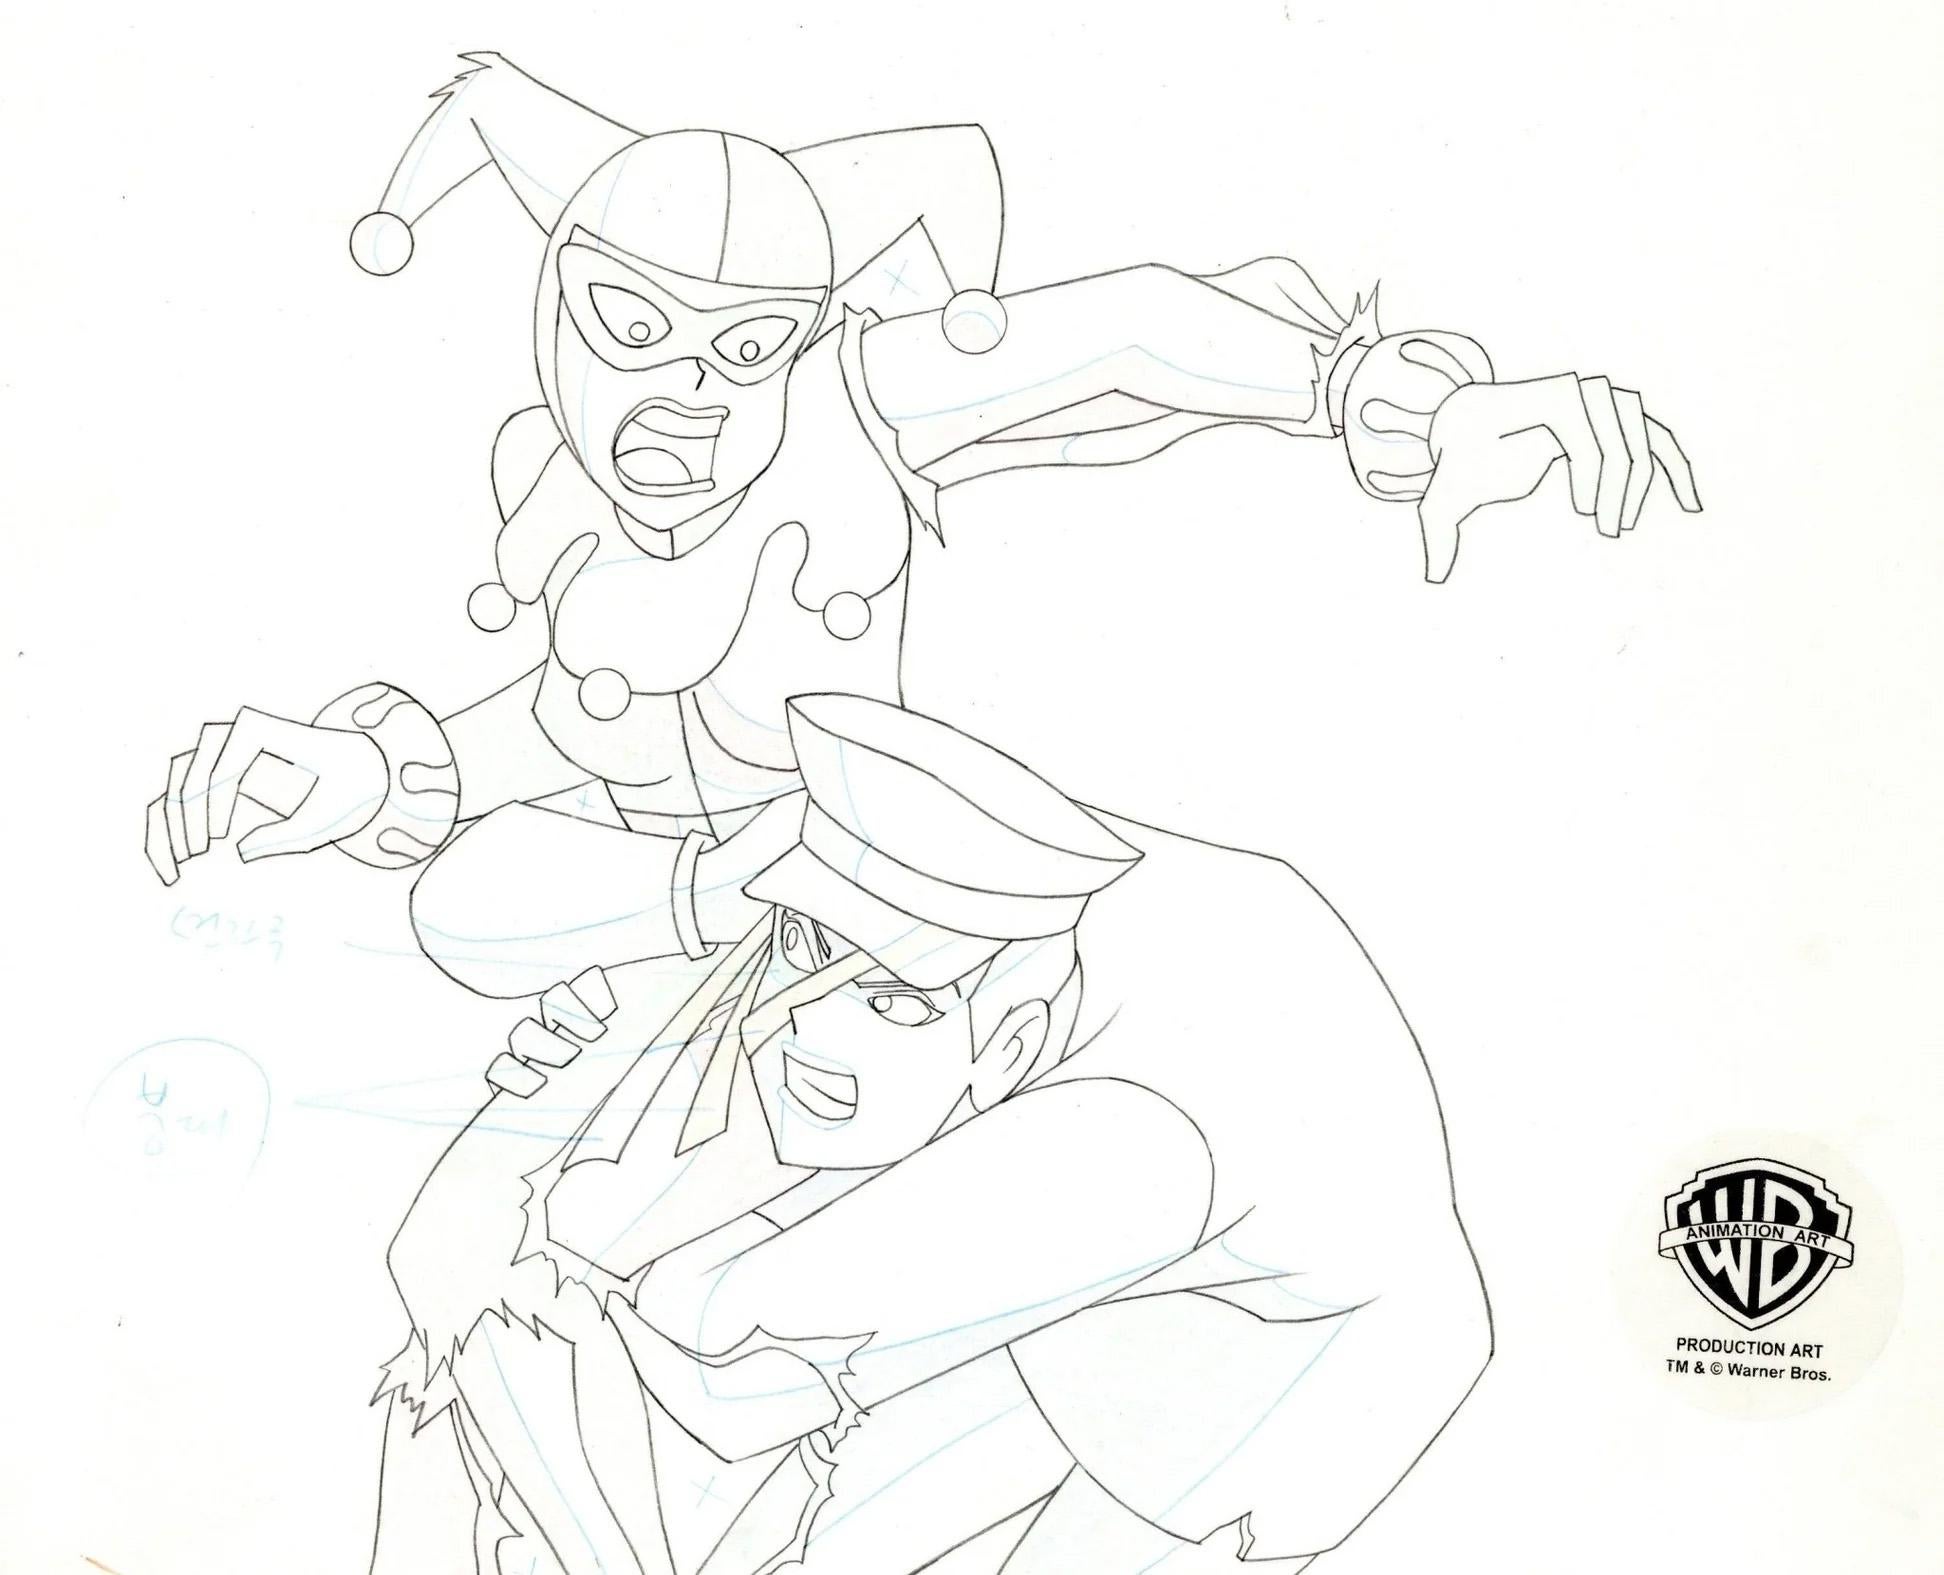 Superman the Animated Series Original Production Drawing: Harley Quinn and Mercy - Art by DC Comics Studio Artists